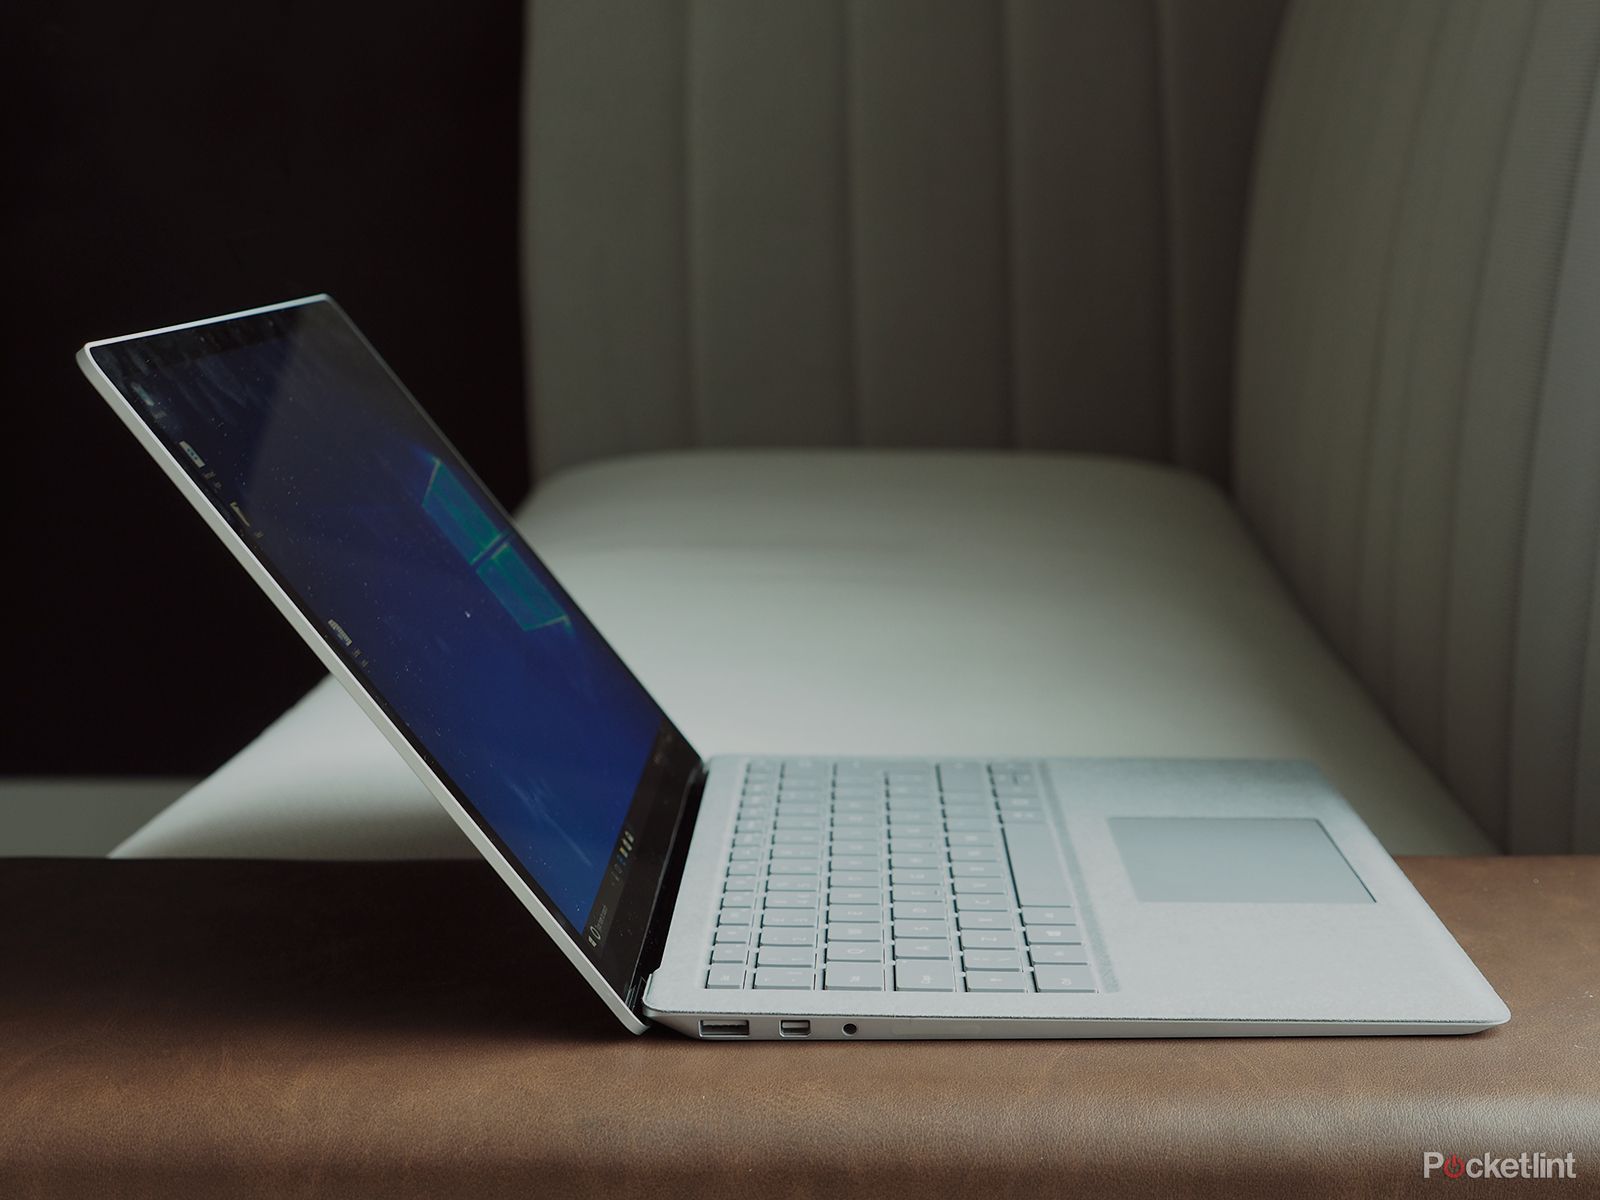 microsoft surface laptop how to upgrade to windows 10 pro from windows 10 s image 1